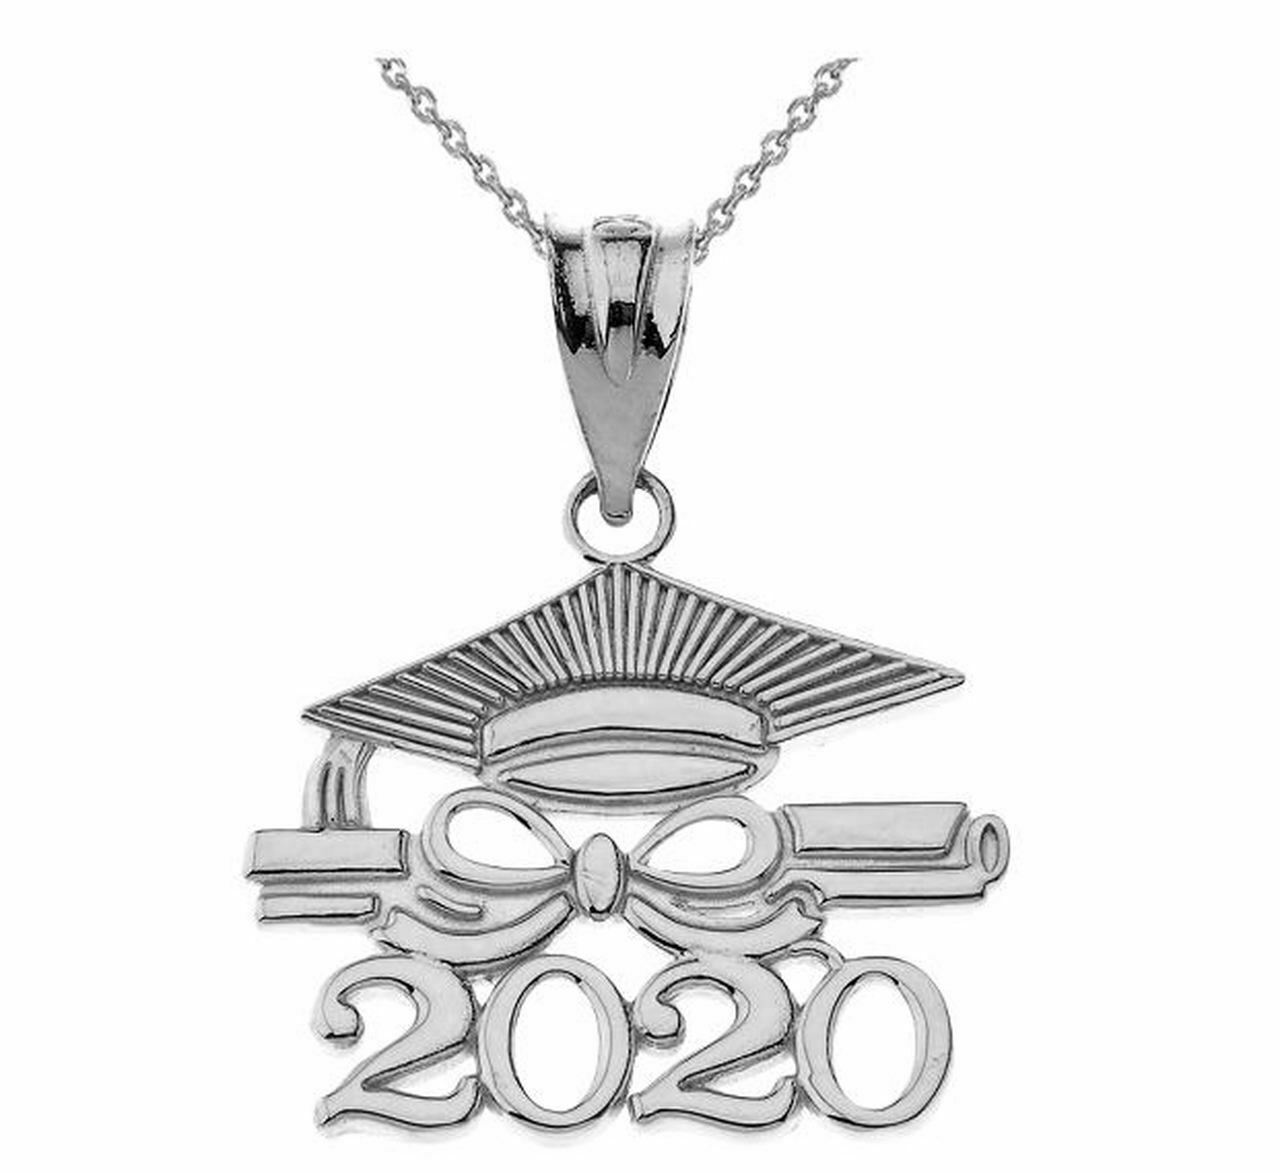 NWT 925 Sterling Silver Class of 2020 Graduation Diploma & Cap Pendant Necklace